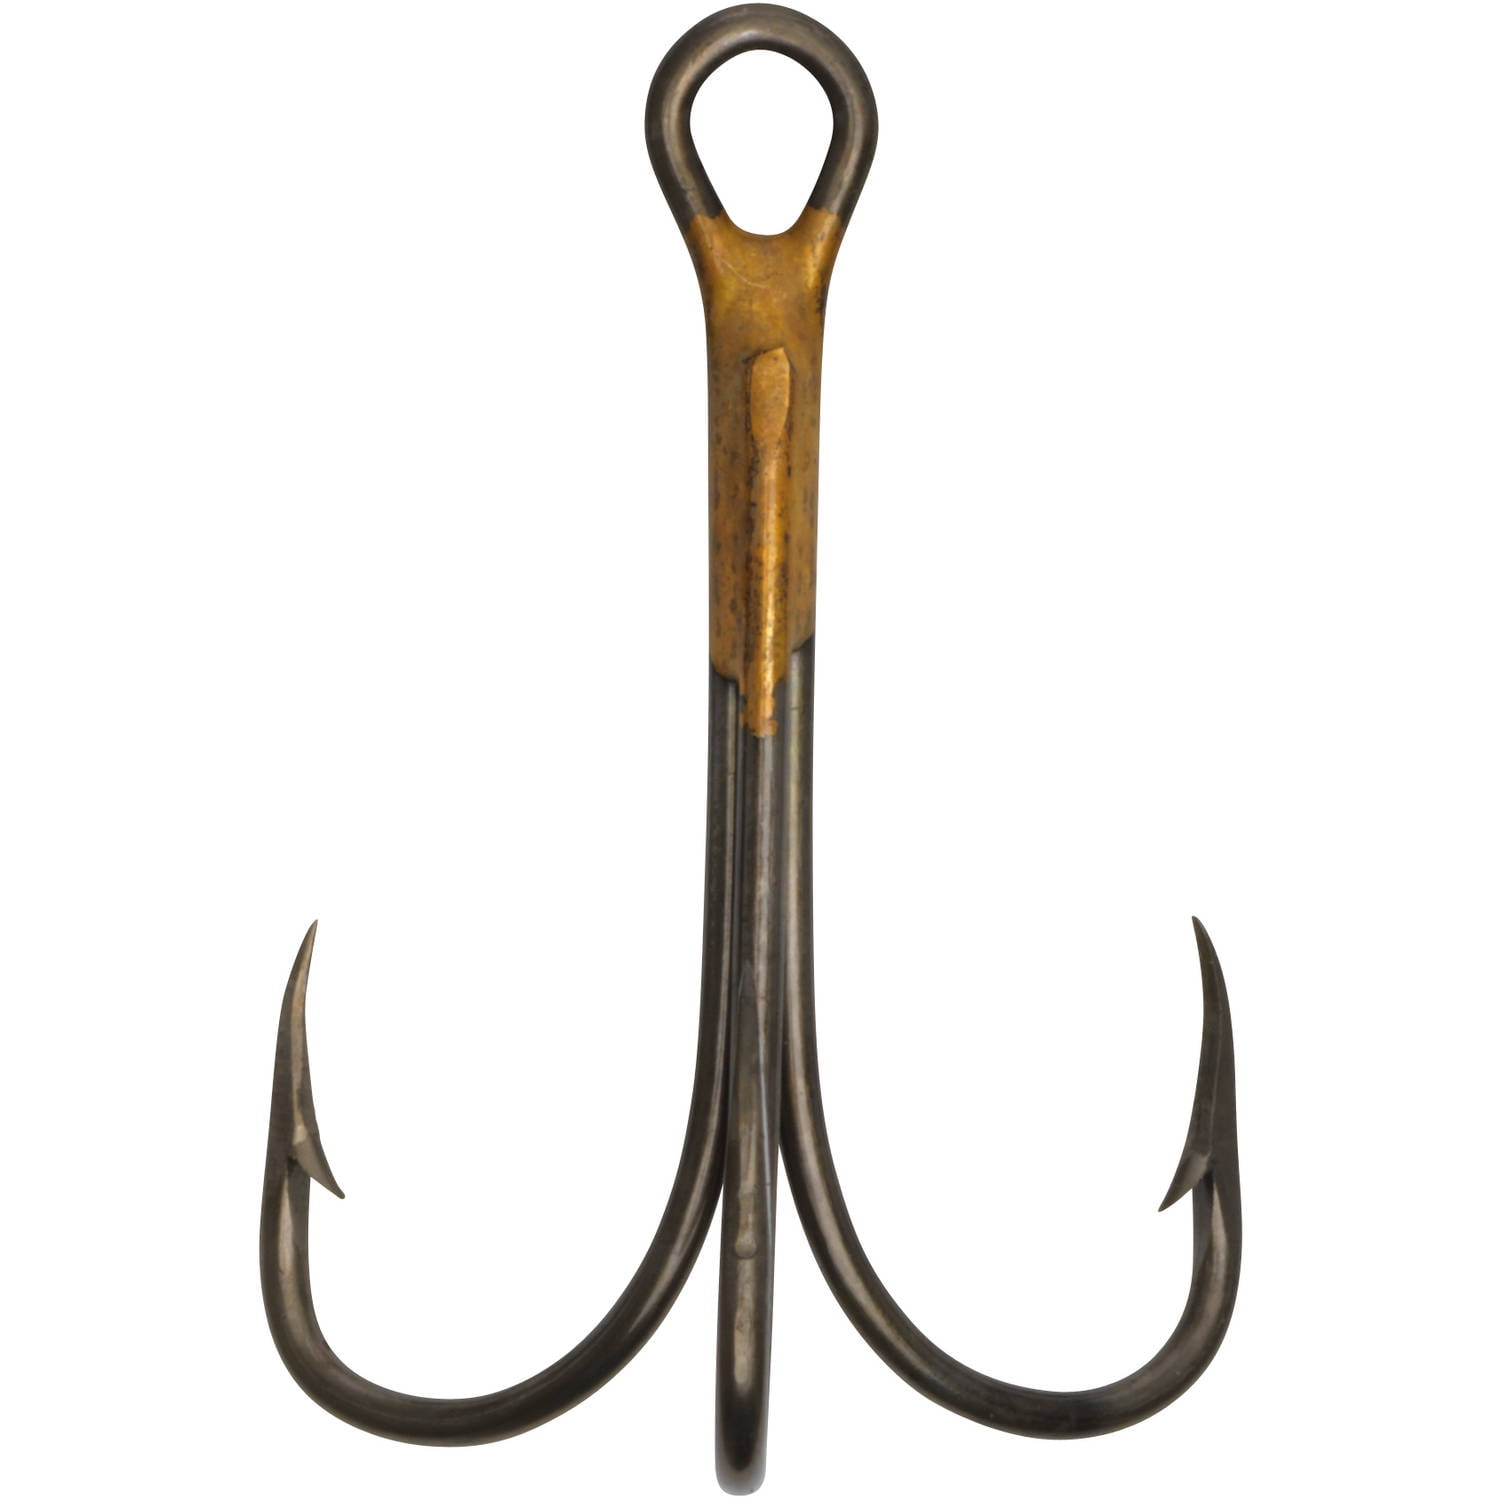 Eagle Claw 2x Treble Regular Shank Curved Point Hook, Bronze